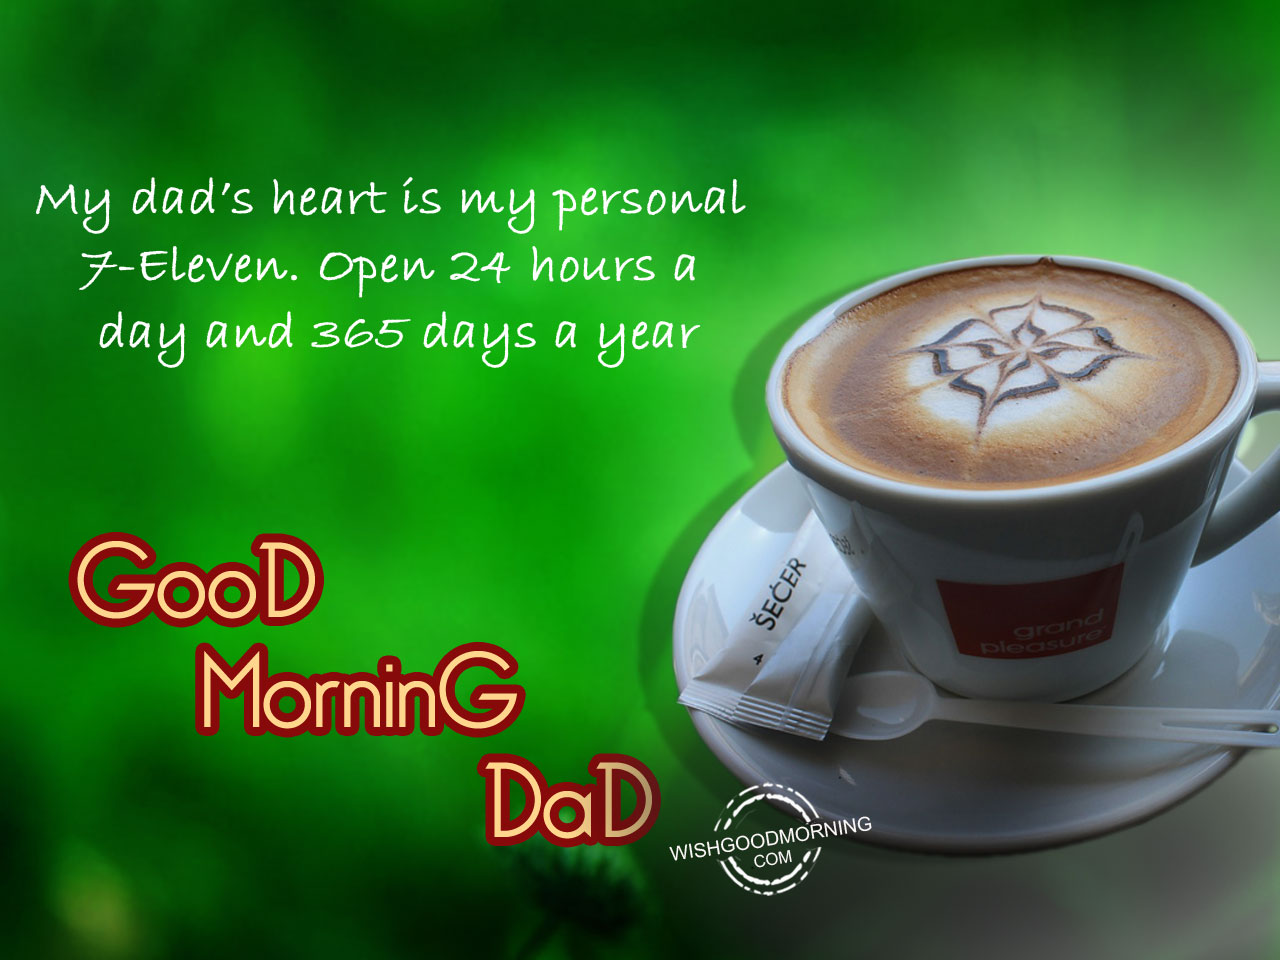 Good Morning Wishes For Father Good Morning Pictures